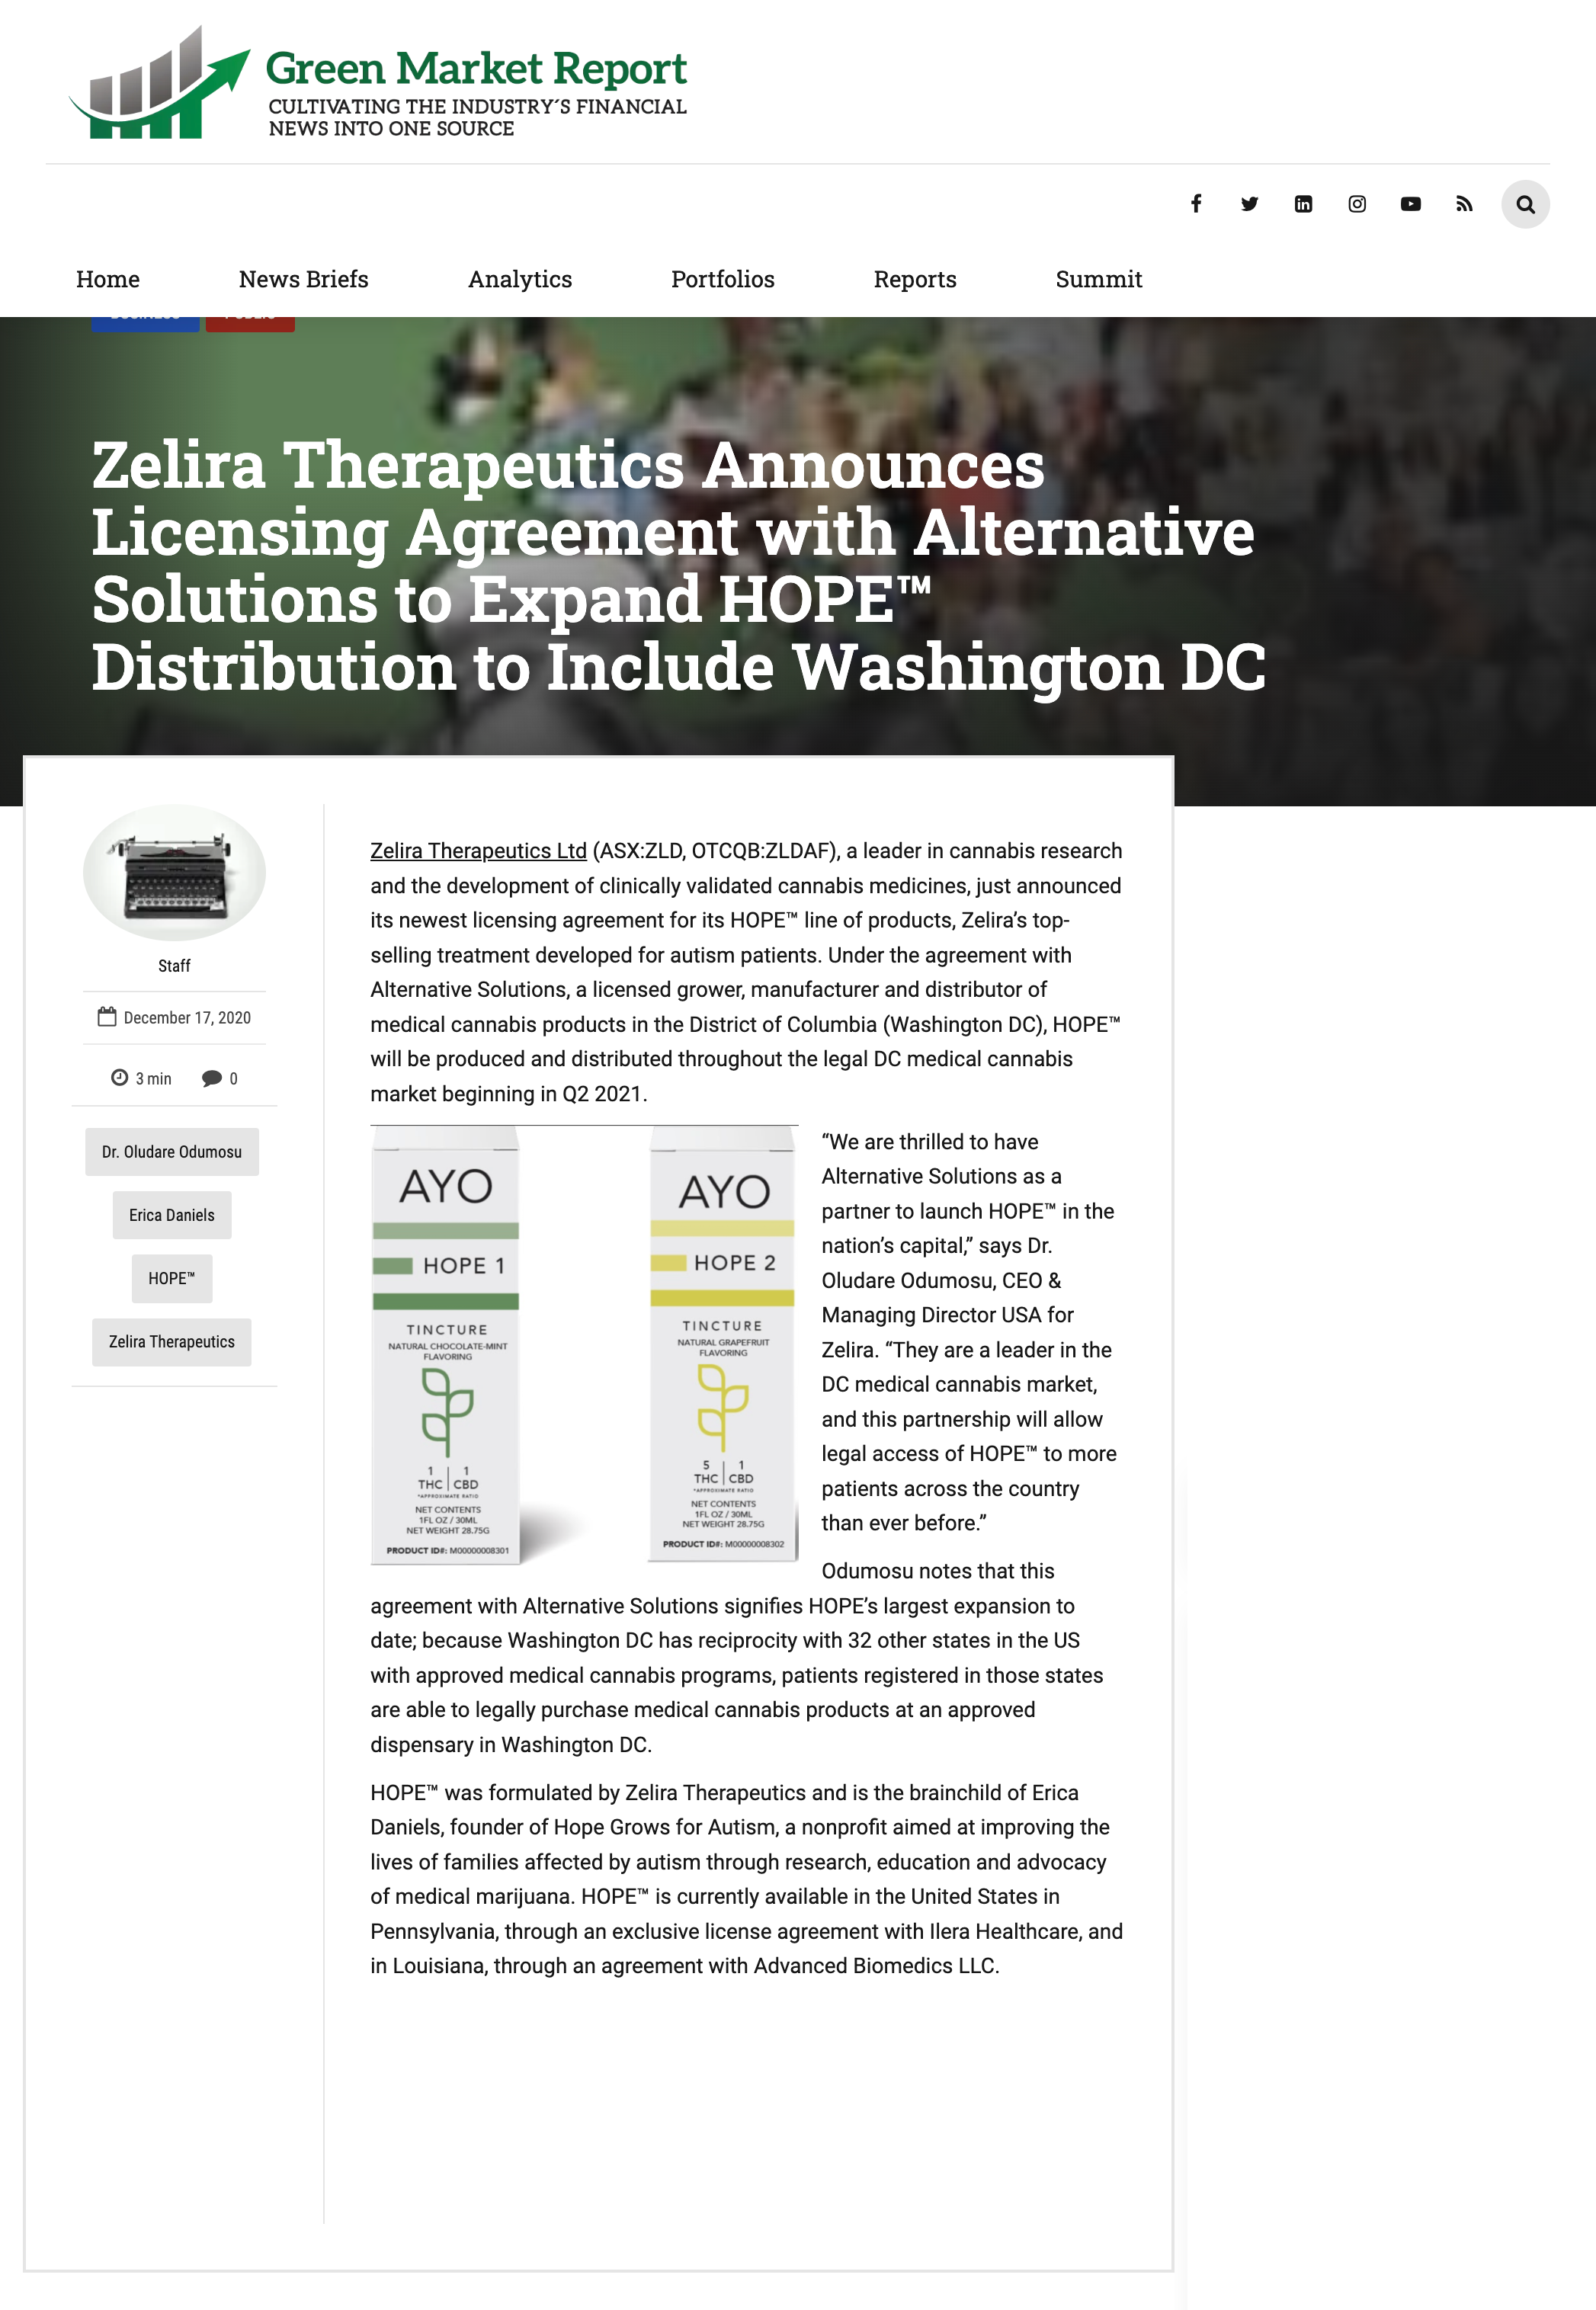 screencapture-greenmarketreport-zelira-therapeutics-announces-licensing-agreement-with-alternative-solutions-to-expand-hope-distribution-to-include-washington-dc-2022-05-05-12_39_41.png